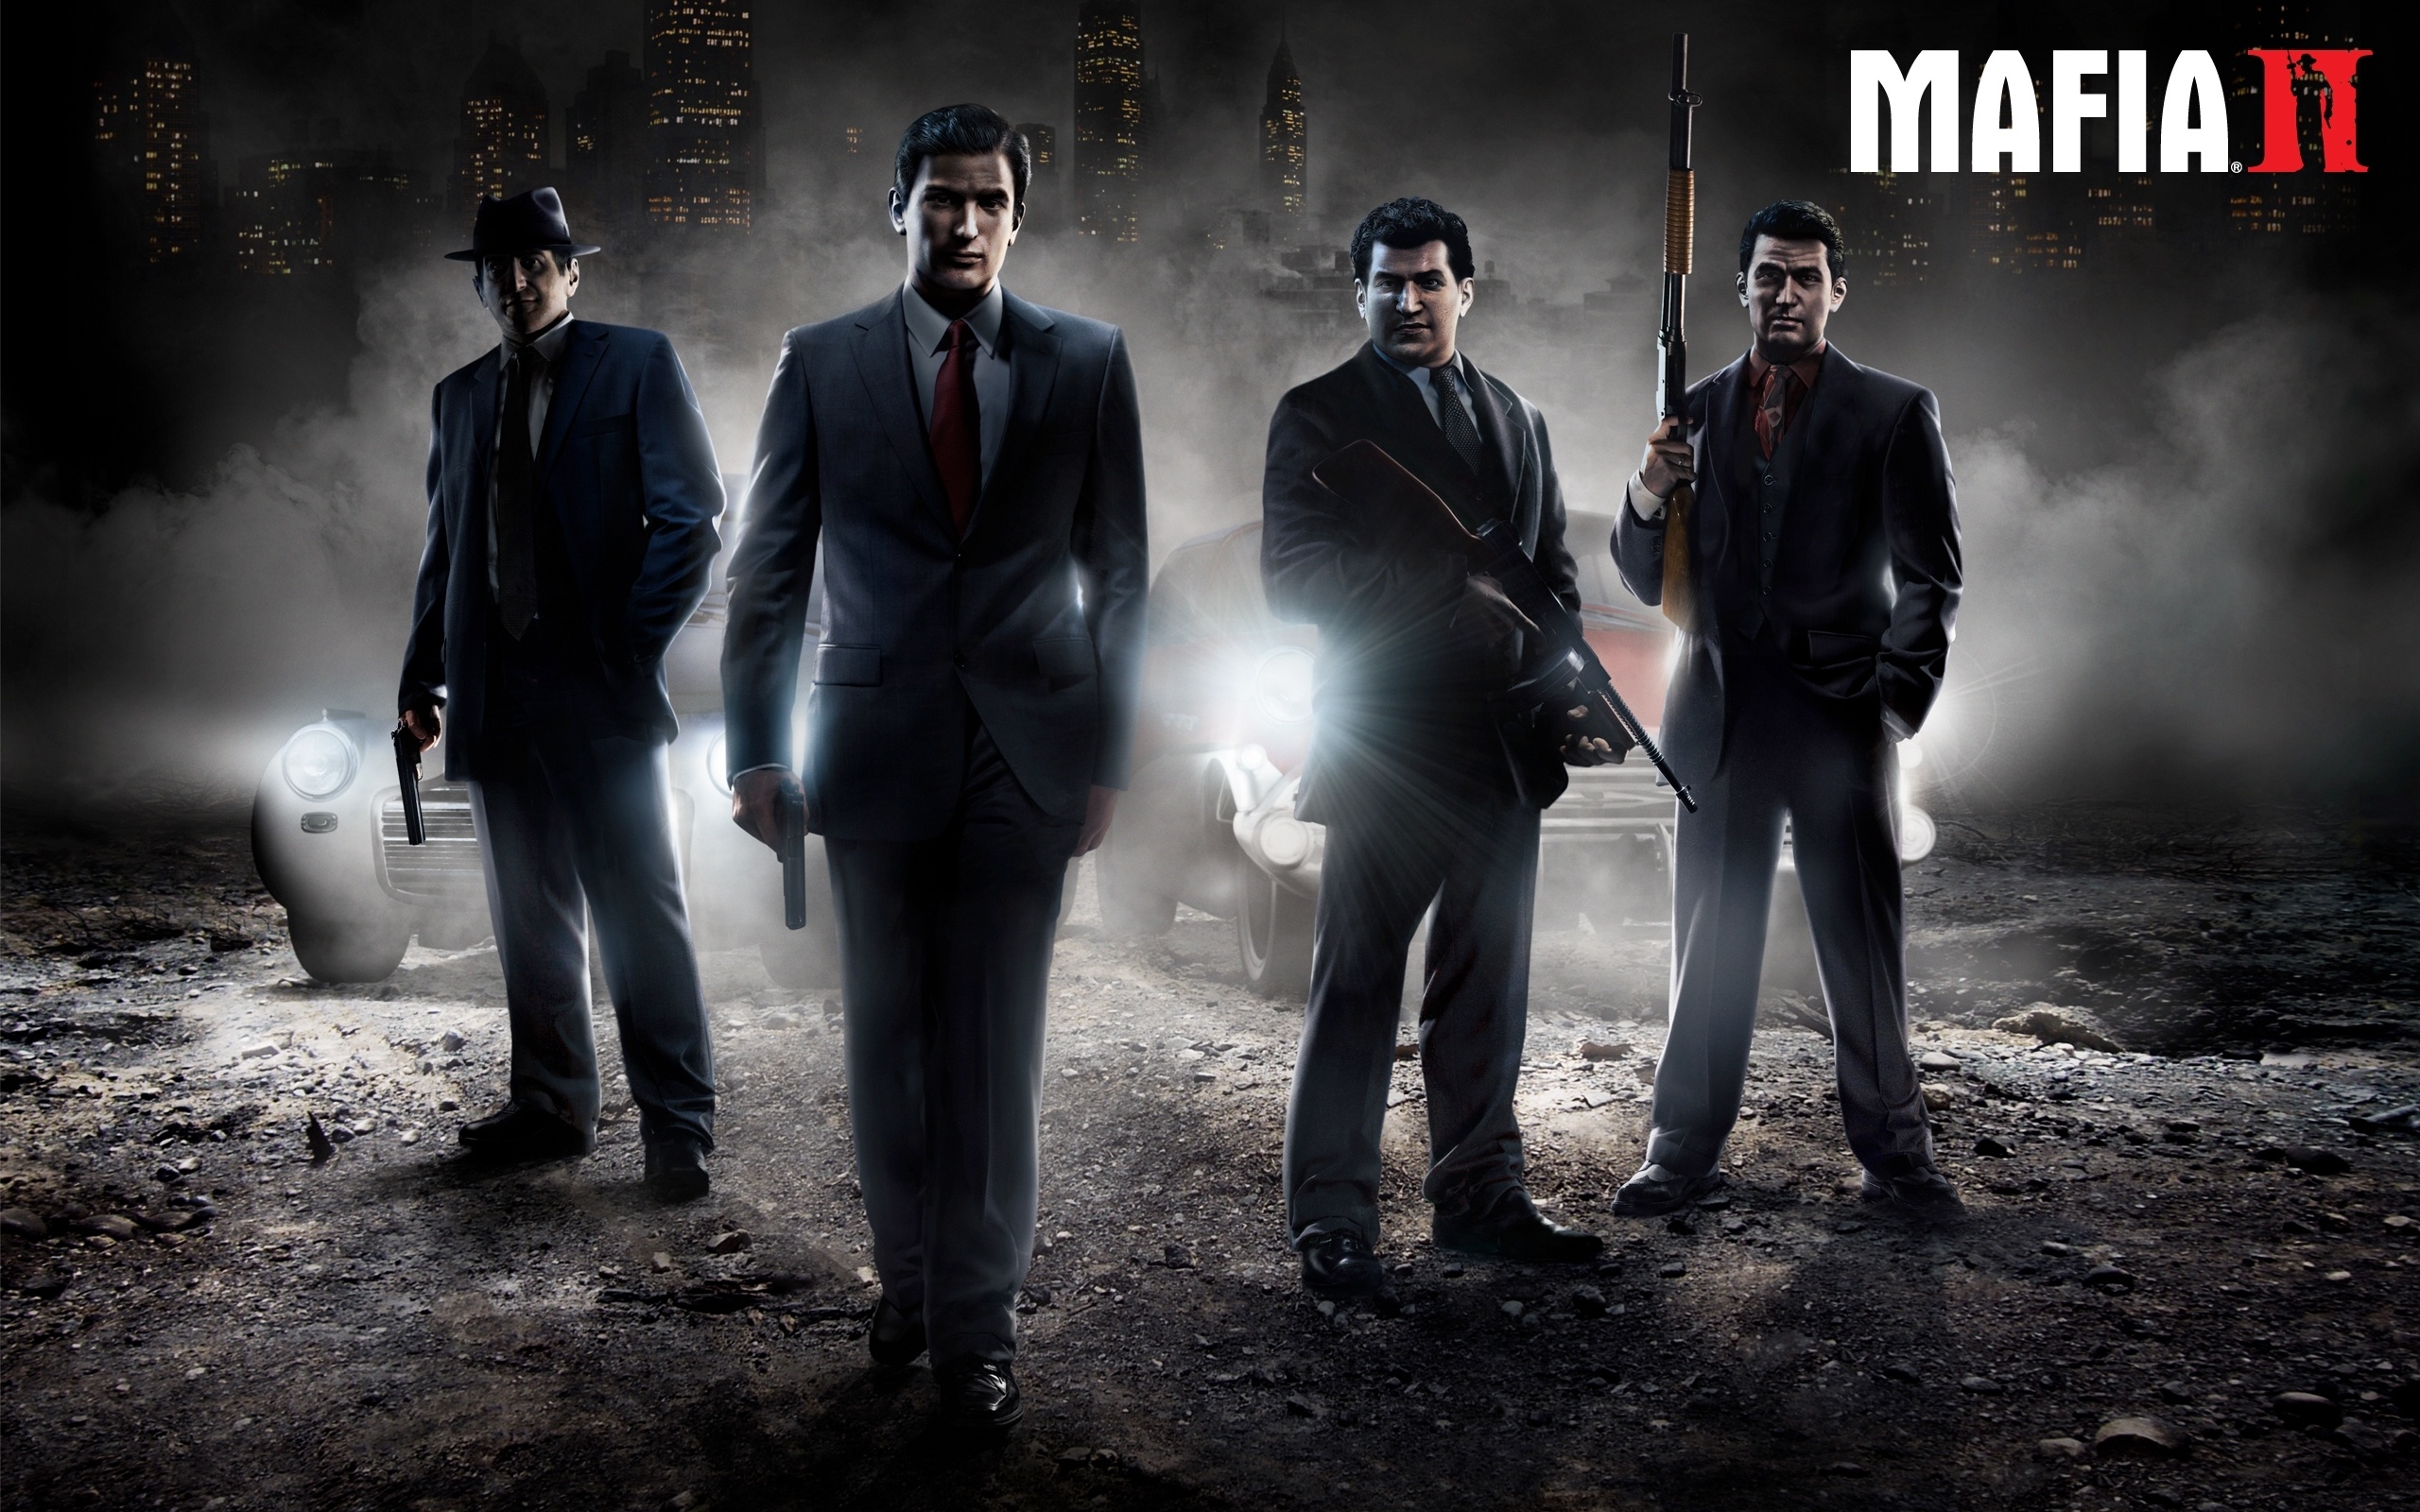 Mobile wallpaper games, Mafia gaming image, Free picture download, High-quality graphics, 2560x1600 HD Desktop